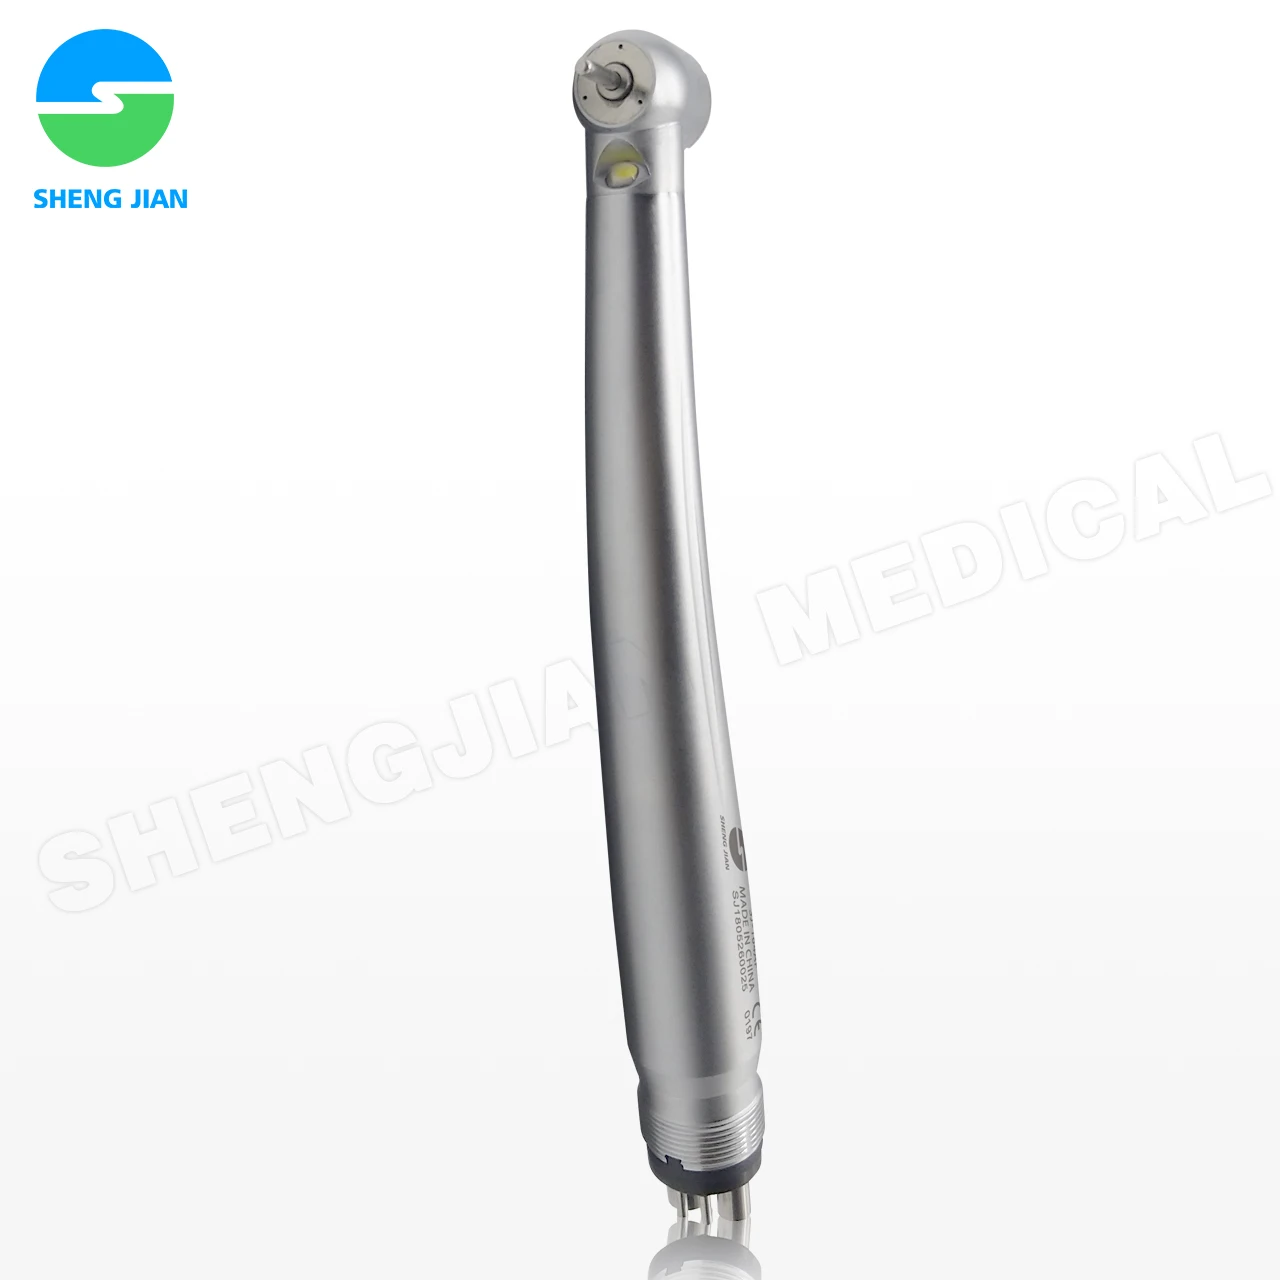 Cheap Product! Hot sale dental Led Light high speed handpiece